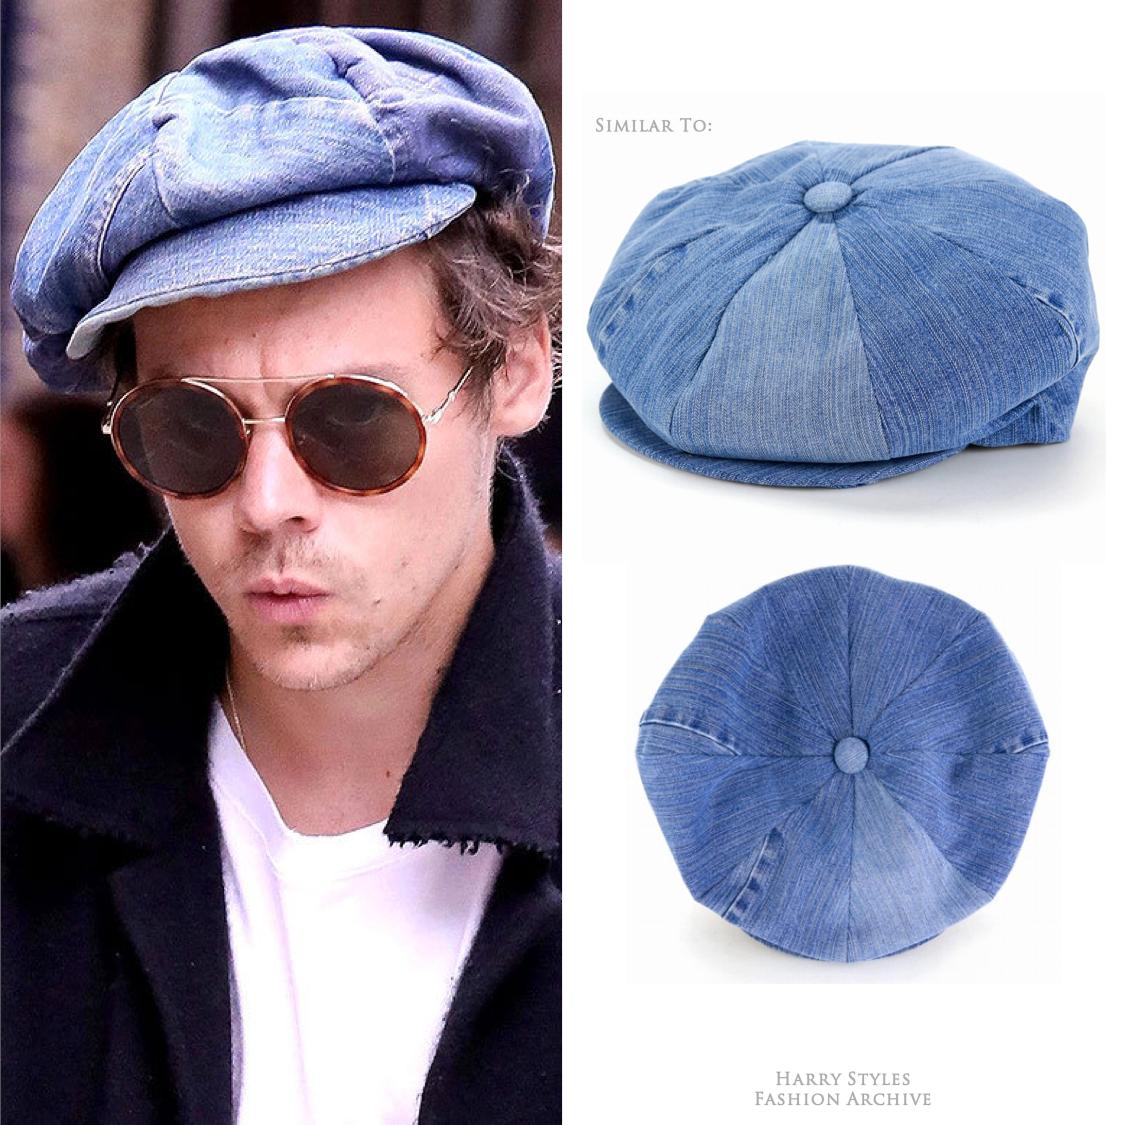 Harry Styles Fashion Archive Harry Wore A Recycled Denim Newsboy Cap Out In London Recently Given That It S Made From Recycled Jeans Each Hat Is Unique More Info On The